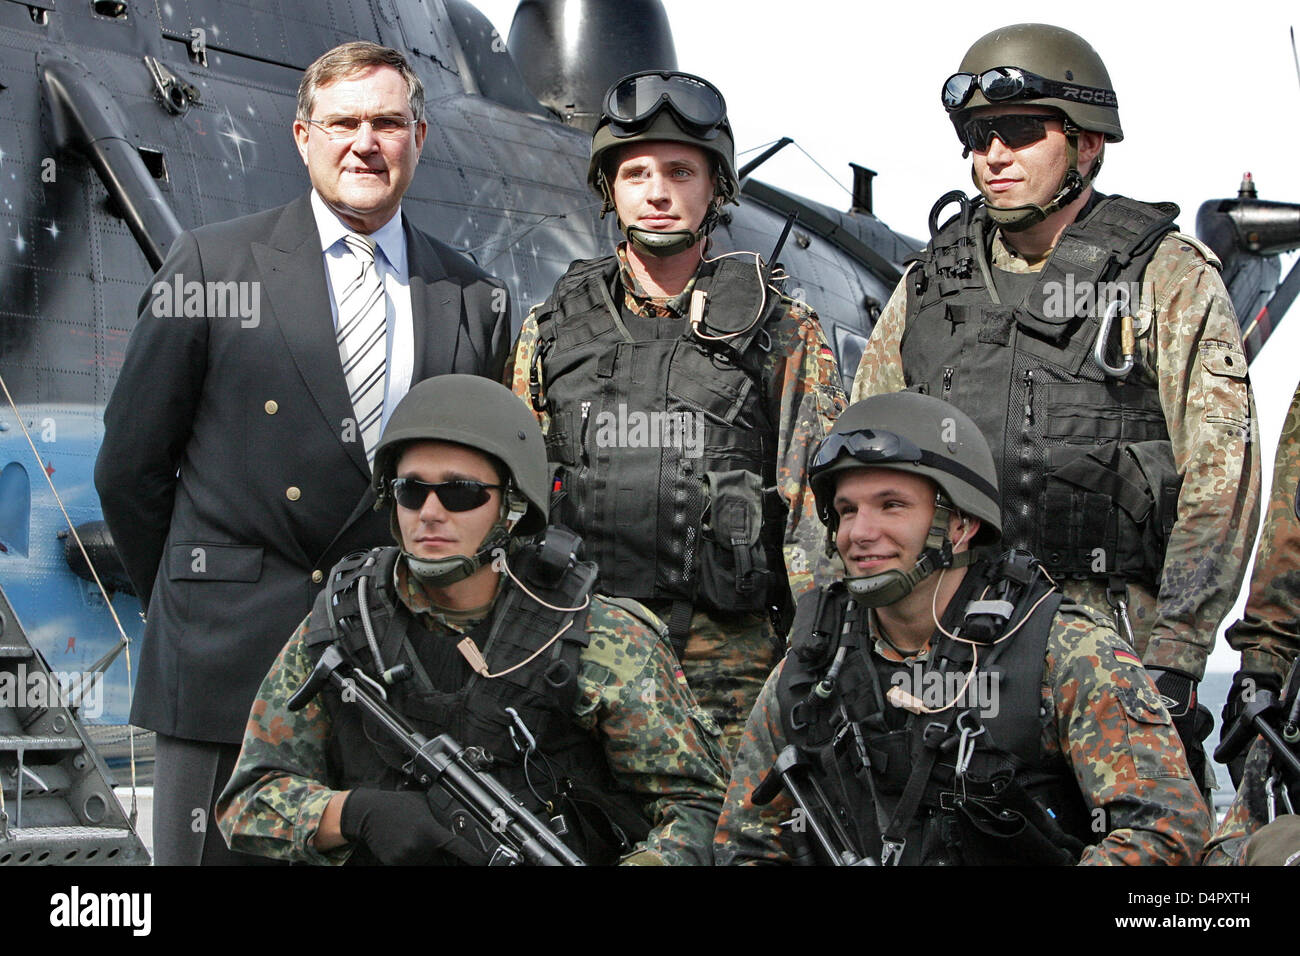 German Minister of Defence Franz Josef Jung (L) poses with soldiers of Special Warfare Group (SEKM) aboard supply ship ?Frankfurt am Main? at naval base Eckernfoerde in Kiel, Germany, 10 September 2009. During his summer tour themed ?Bundeswehr - modern and powerful?, Mr Jung visisted the German Navy stationed in Kiel. Photo: Bodo Marks Stock Photo